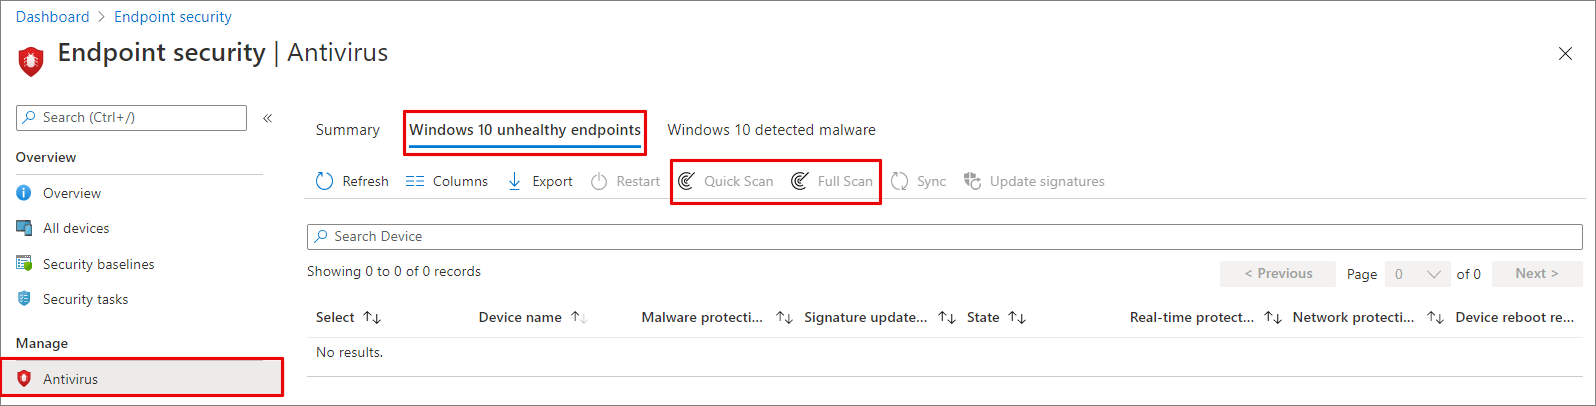 Scan options on the Windows 10 unhealthy endpoints tab.